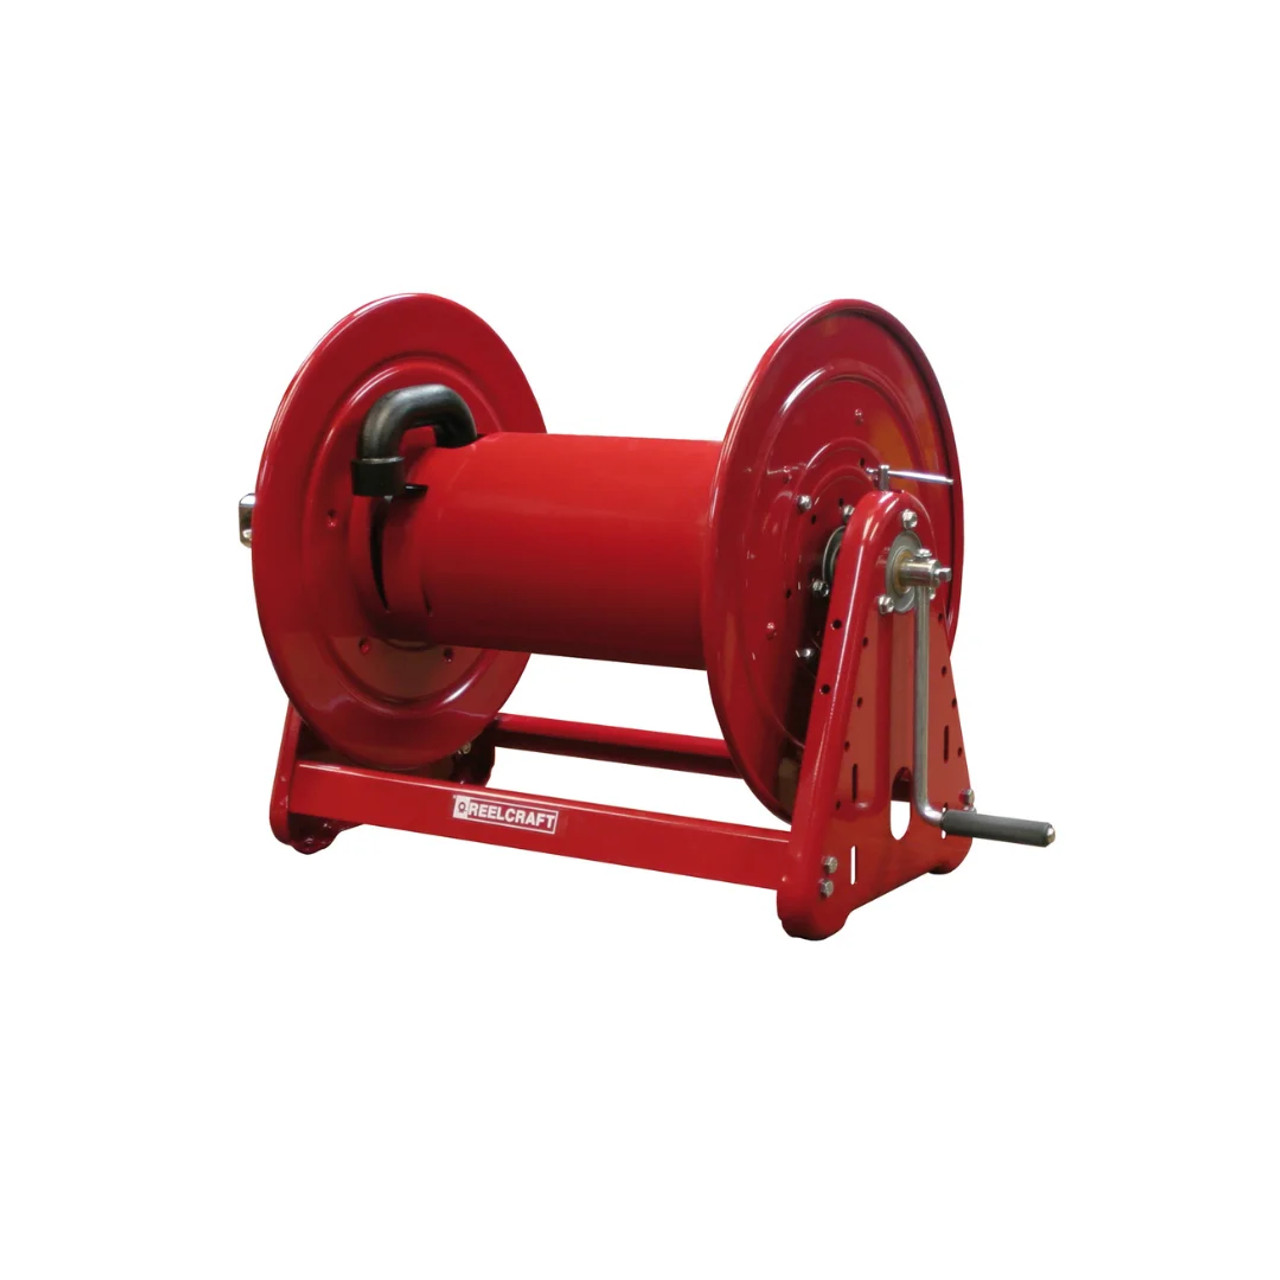 REELCRAFT SWIVEL HOSE REEL - Hose Reel Parts and Accessories